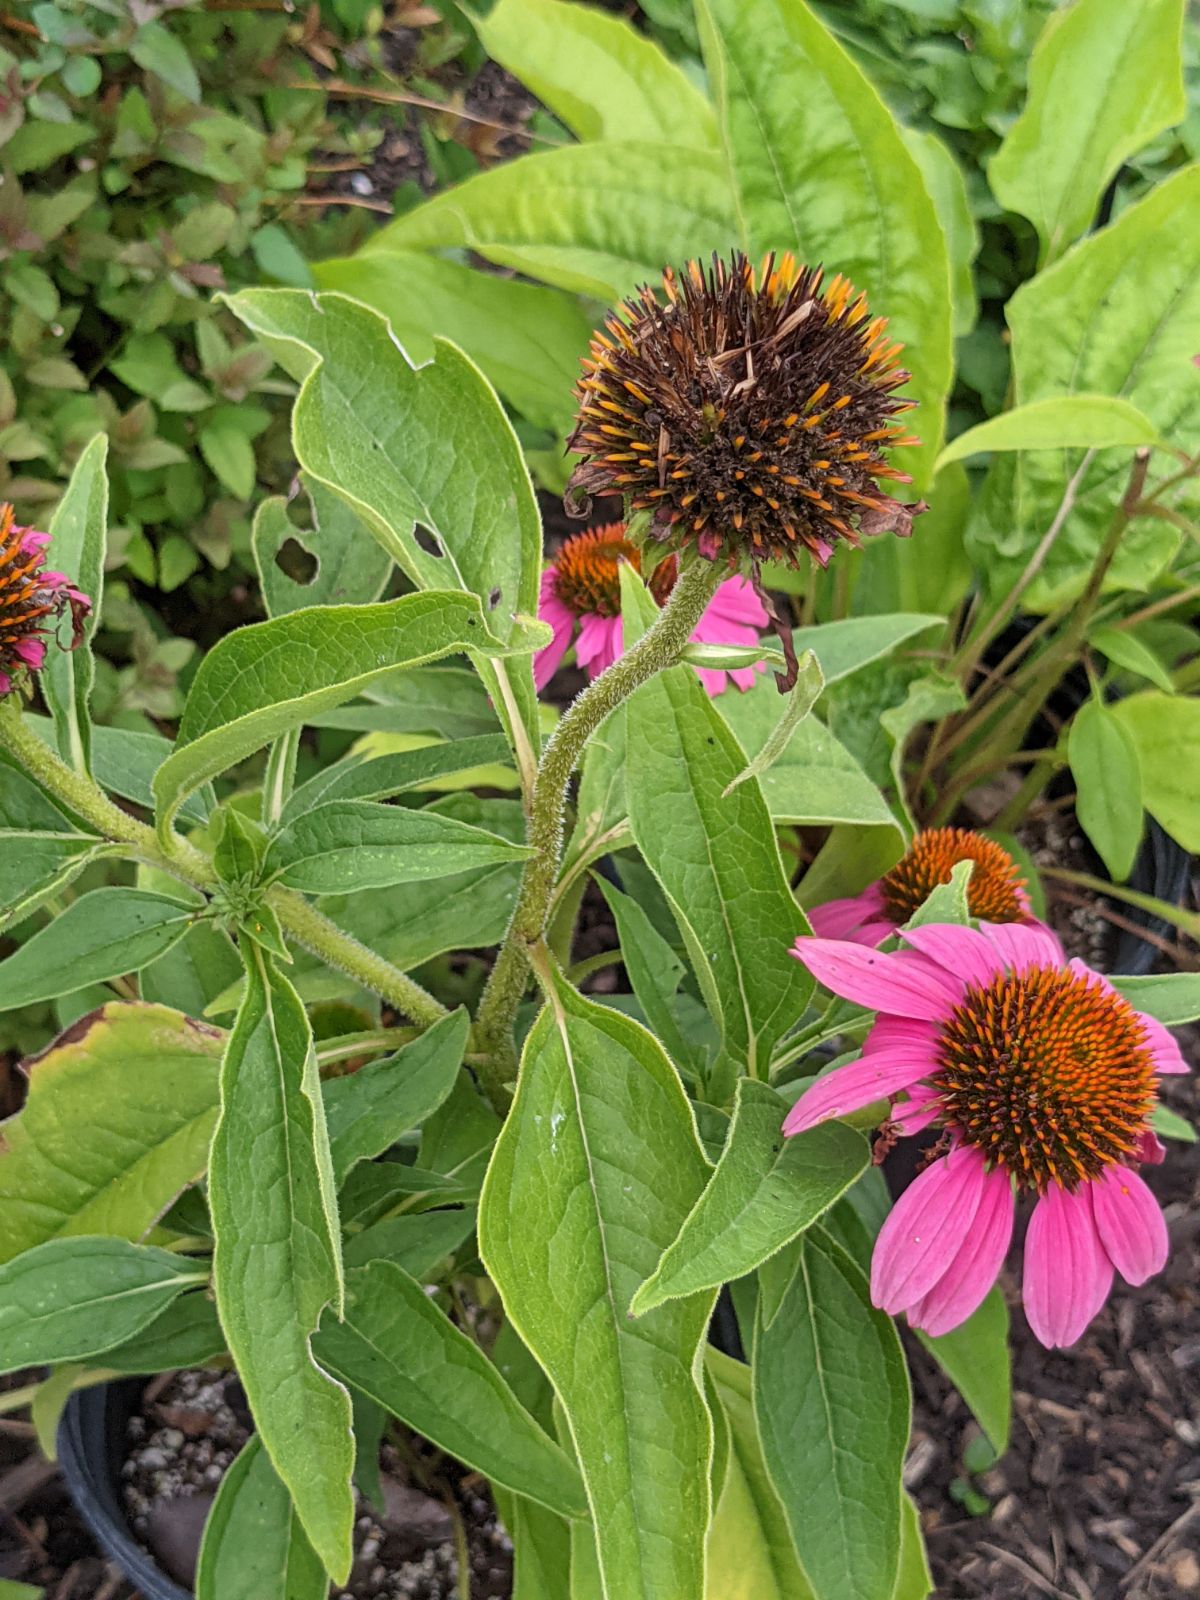 New growth on a pretty pink coneflower 